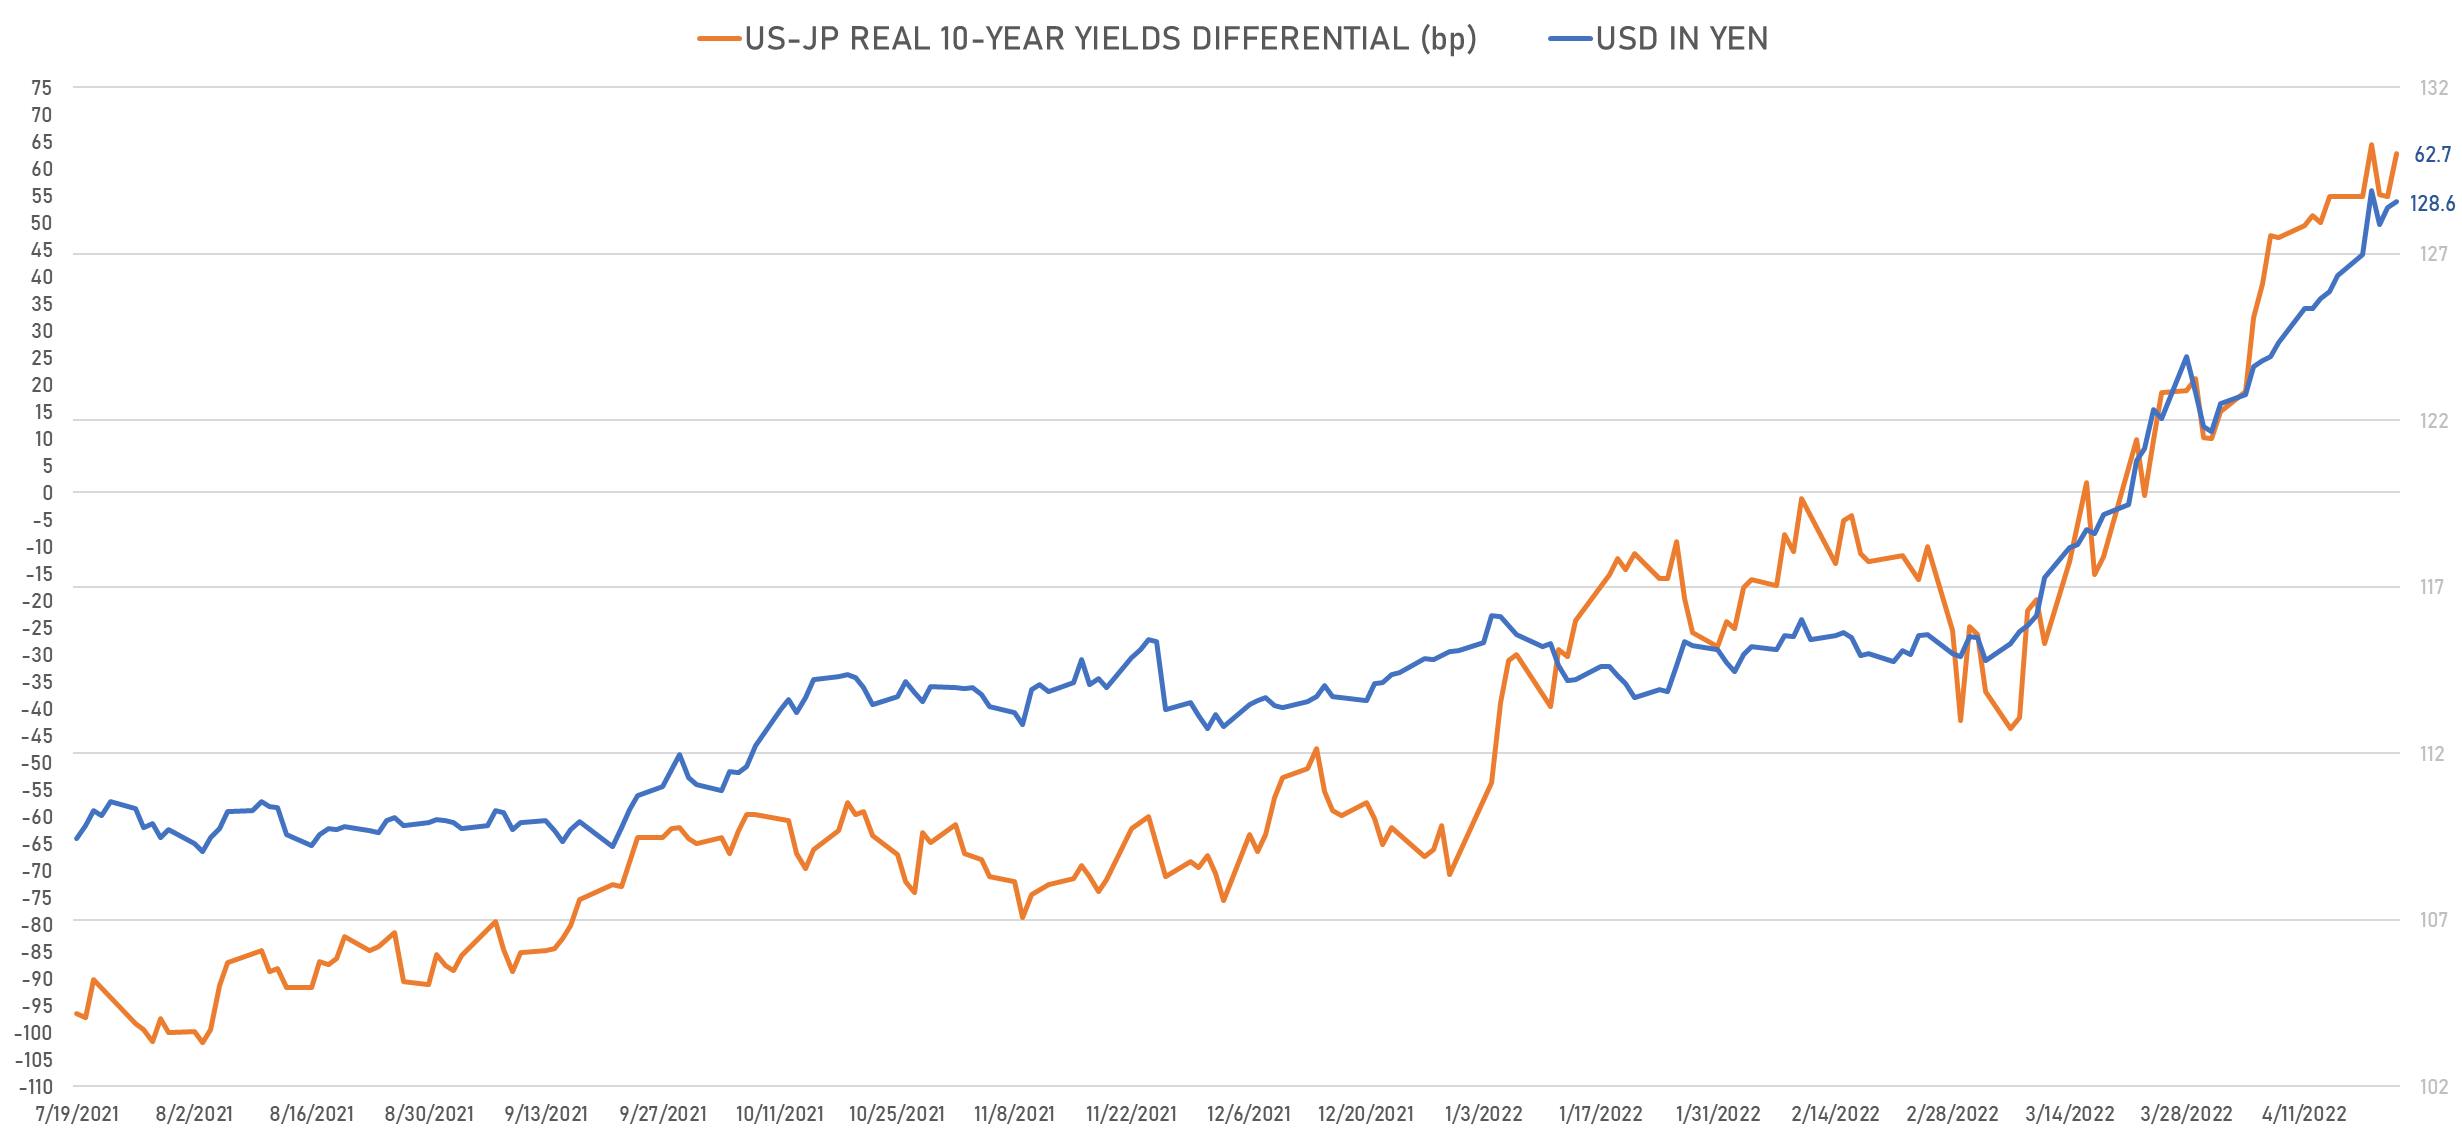 US JP 10Y Real Yields Differential vs JPY Spot | Sources: phipost.com, Refinitiv data